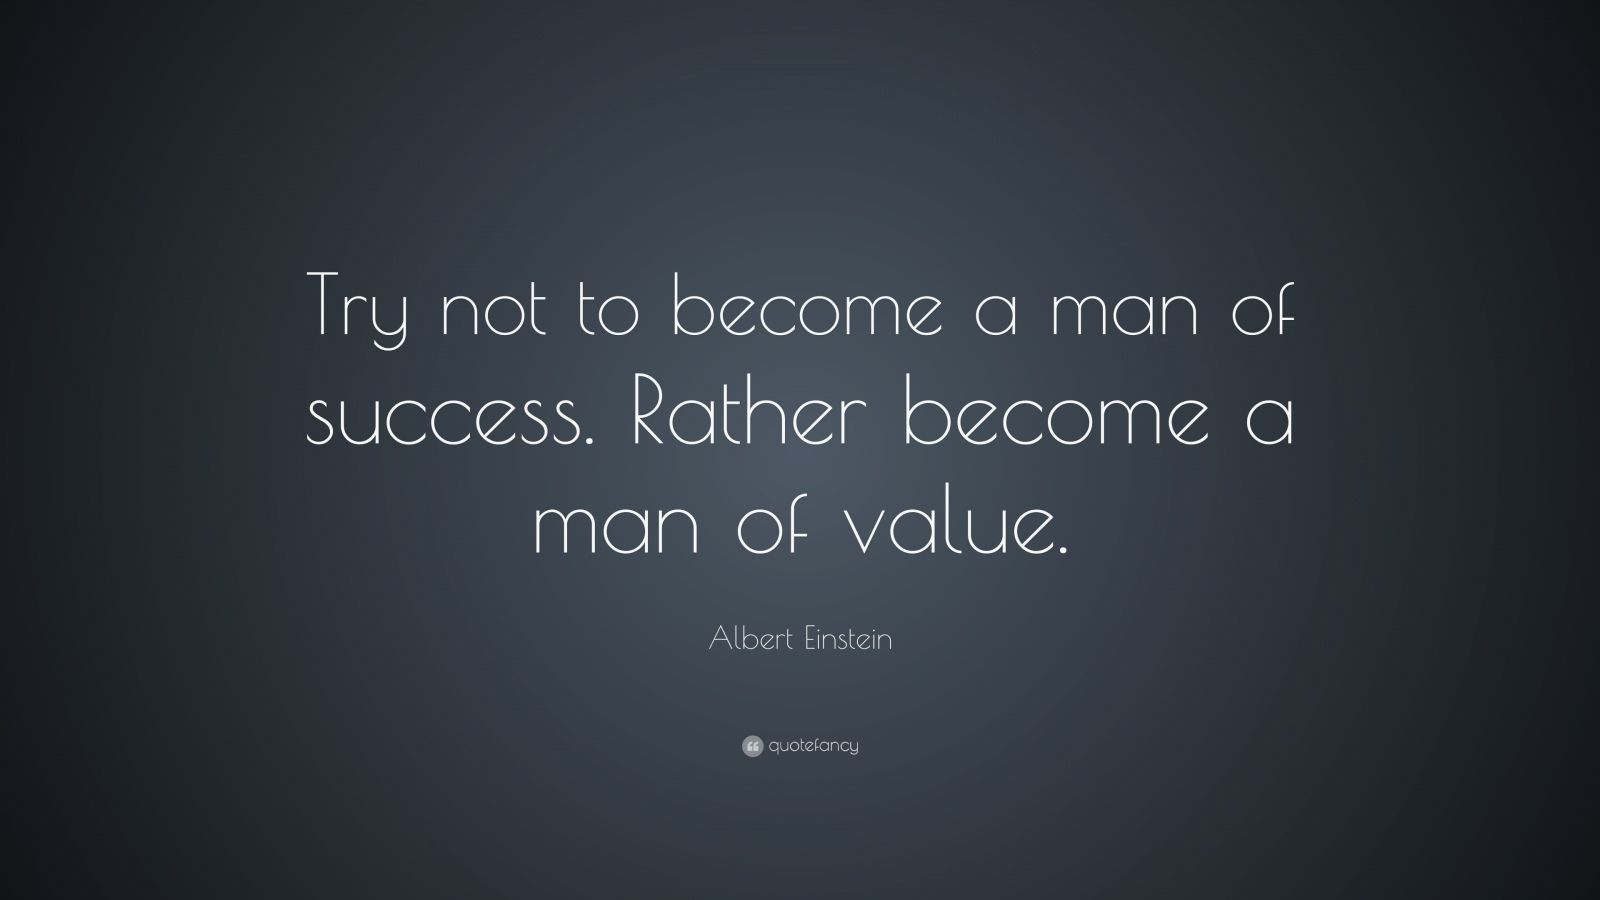 Albert Einstein Quote: “Try not to become a man of success. Rather become a man of value.”